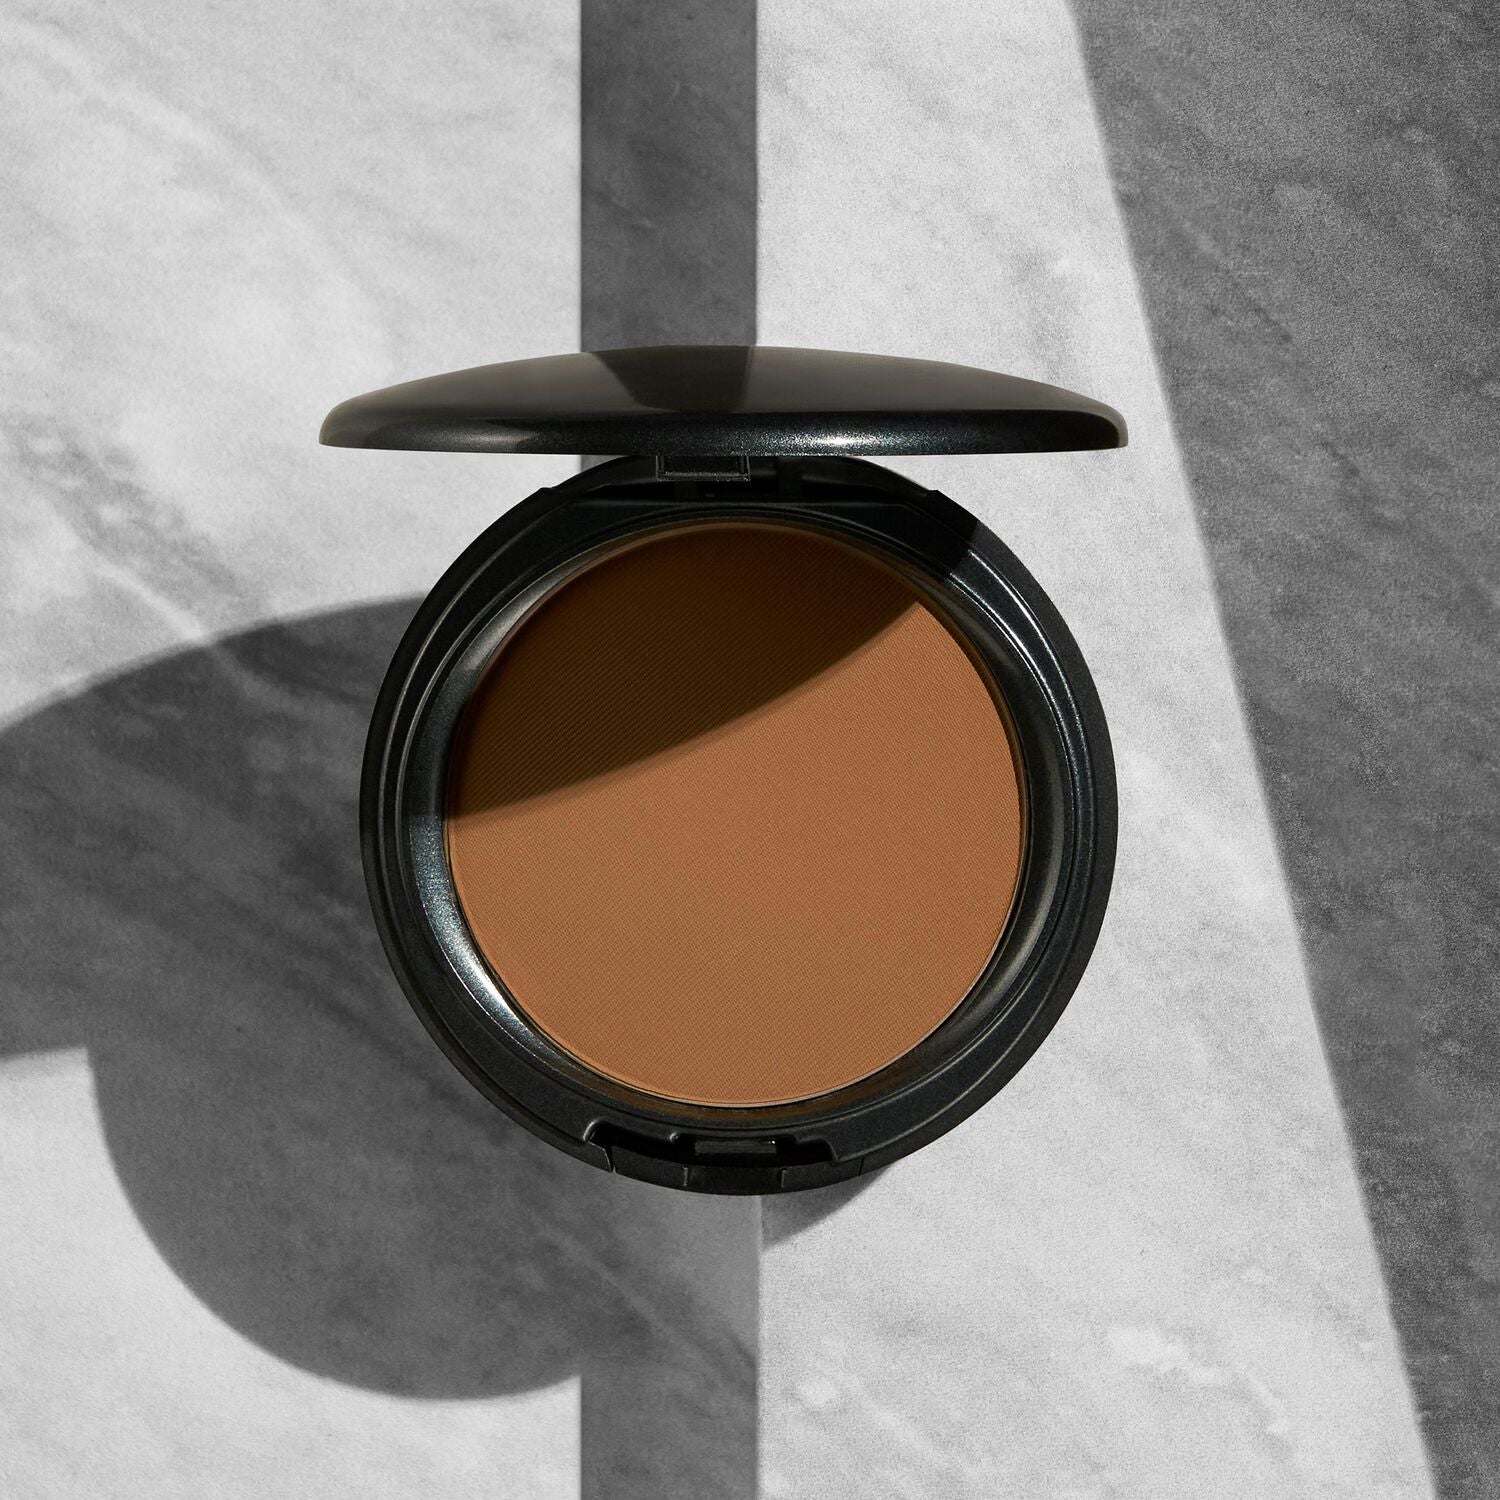 Coverfx Pressed Mineral Foundation in shade D3